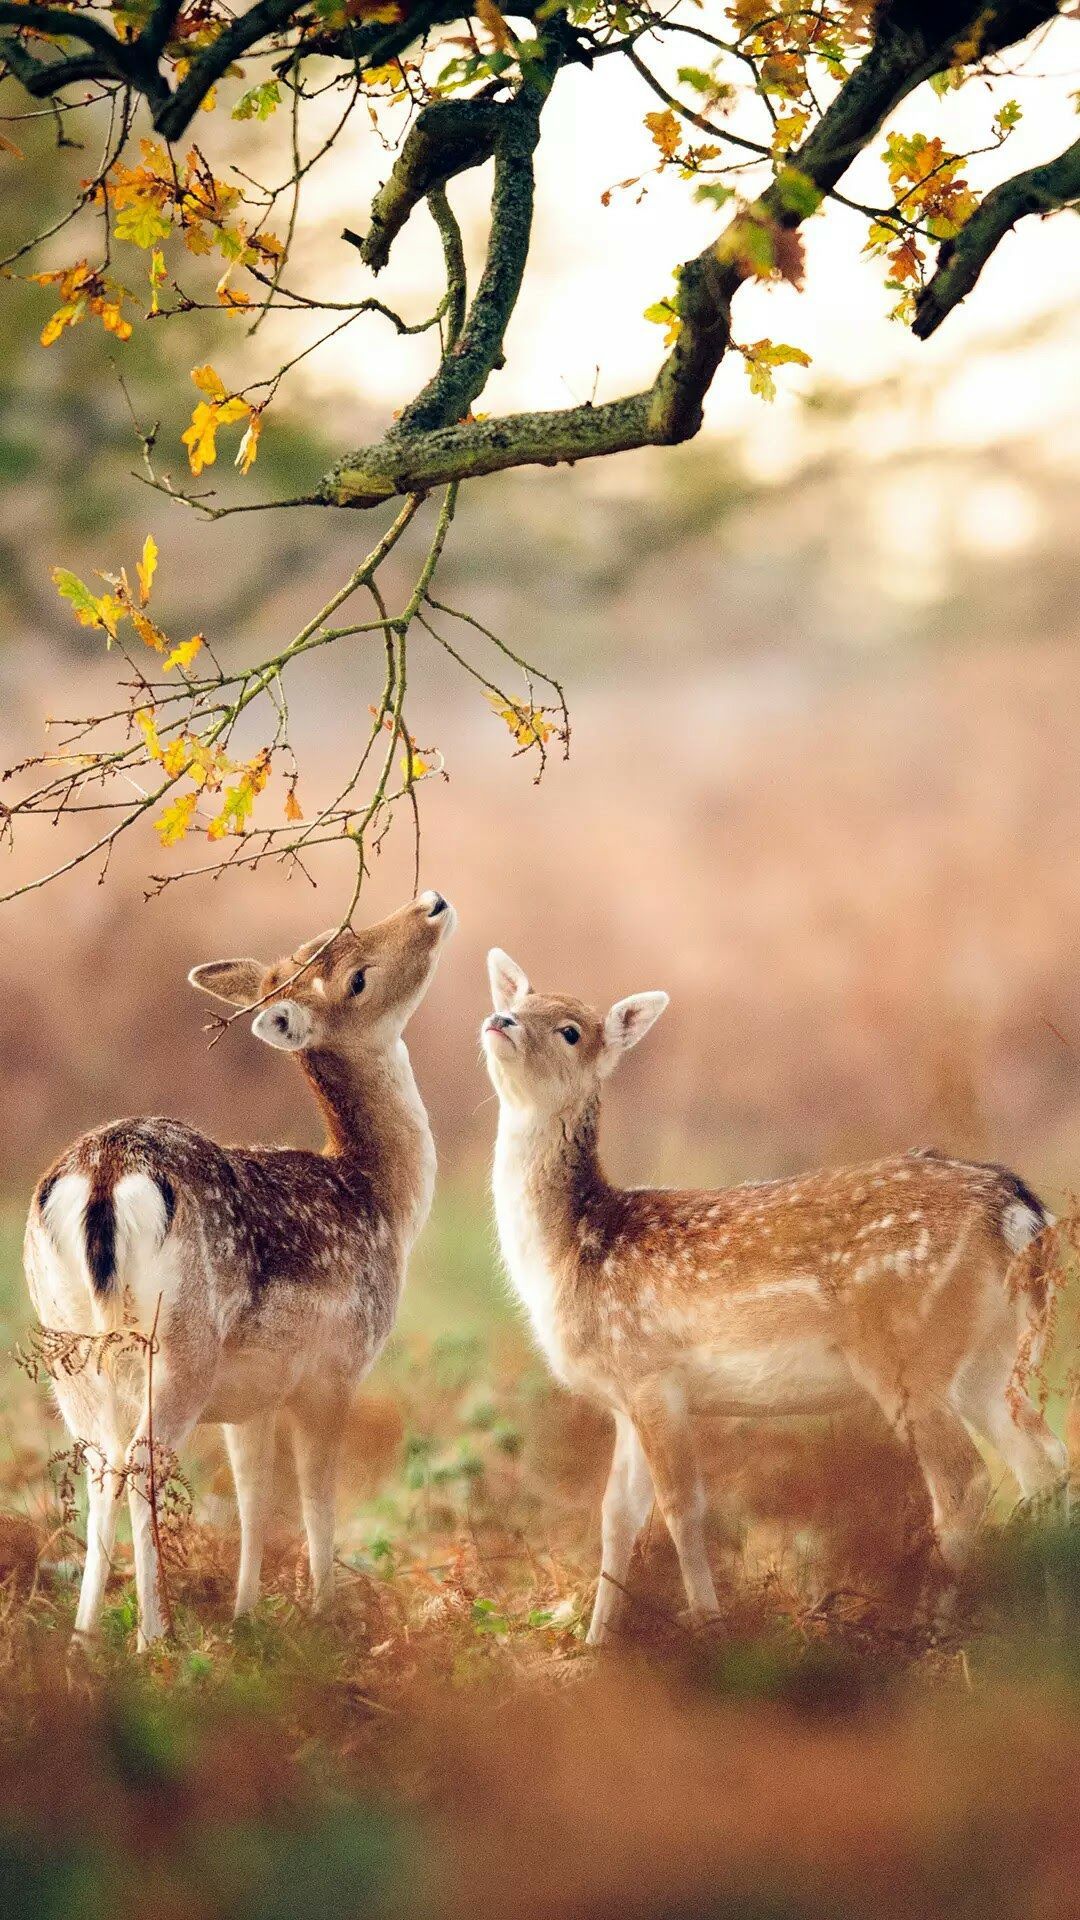 Wallpaper. Animals, October country, Nature